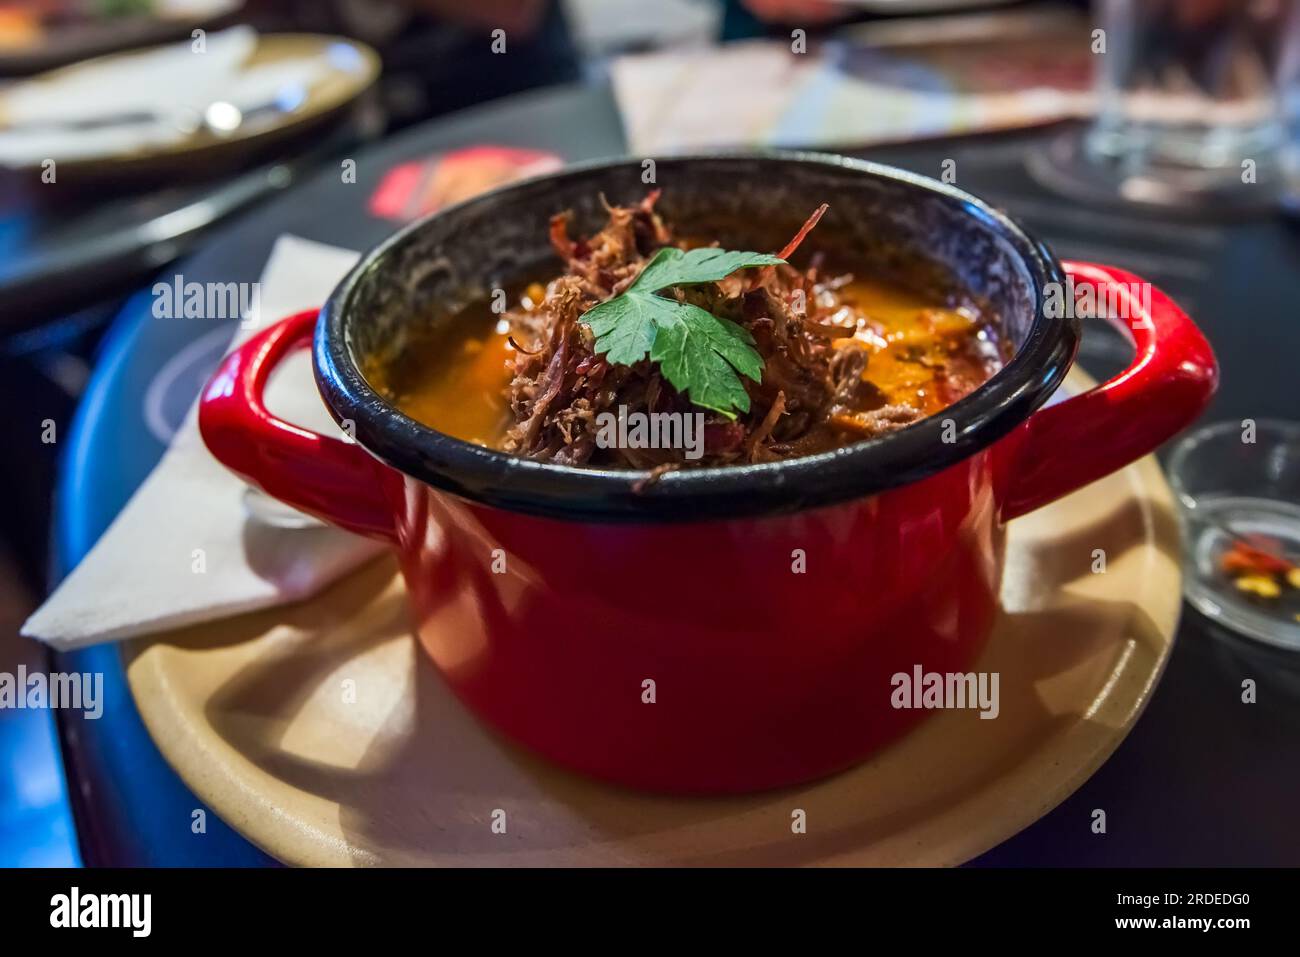 Gulyas, traditional Hungarian dish, hearty stew made with beef or pork, onions, paprika, tomatoes, and various spices. Local restaurant in old Buda. Stock Photo